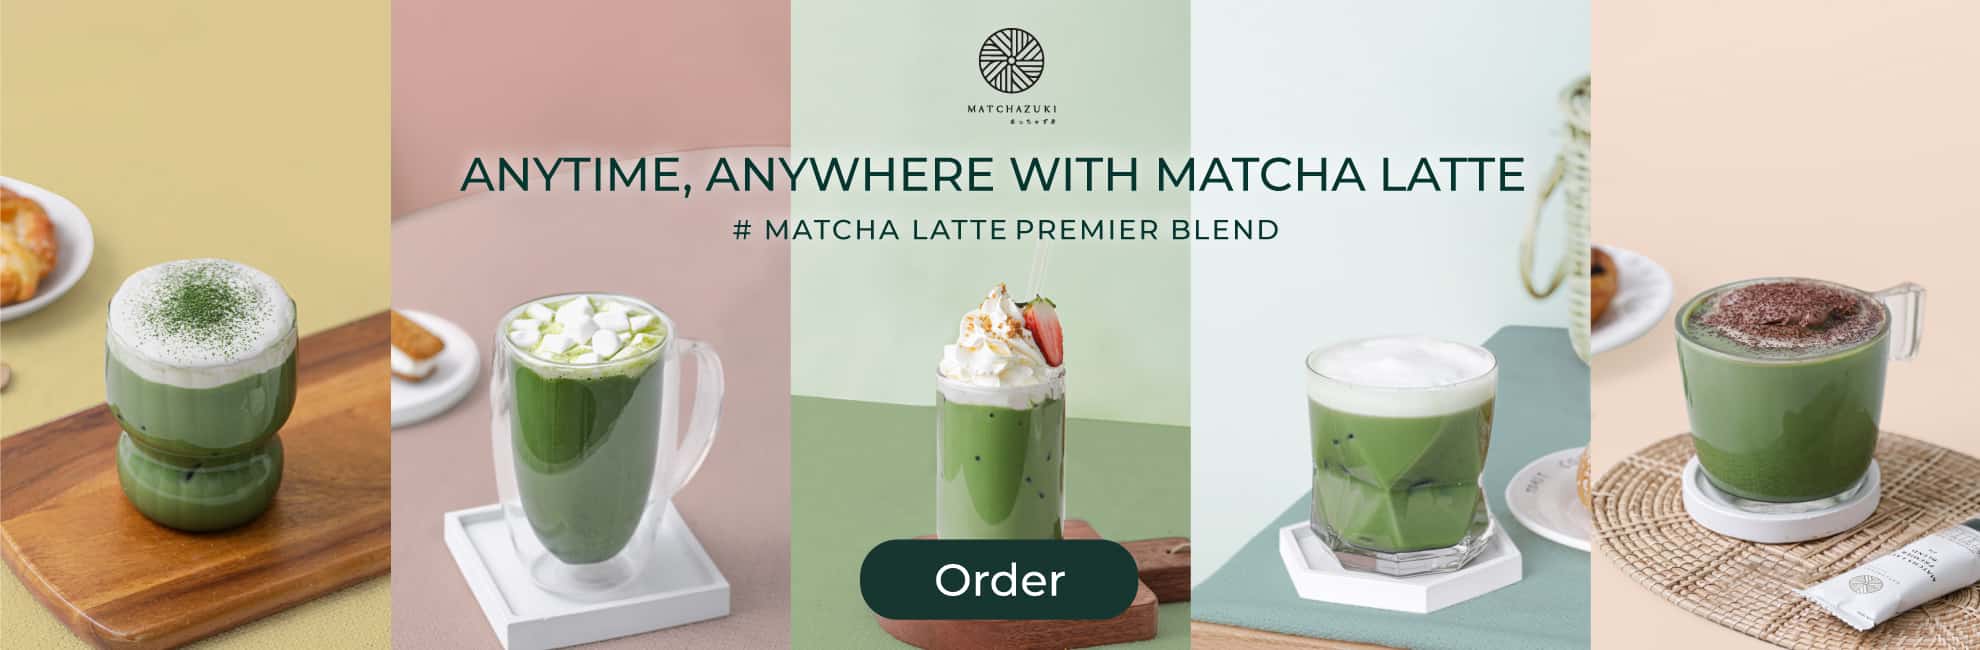 Everyday_Matcha_Latte_Home_Page-Eng